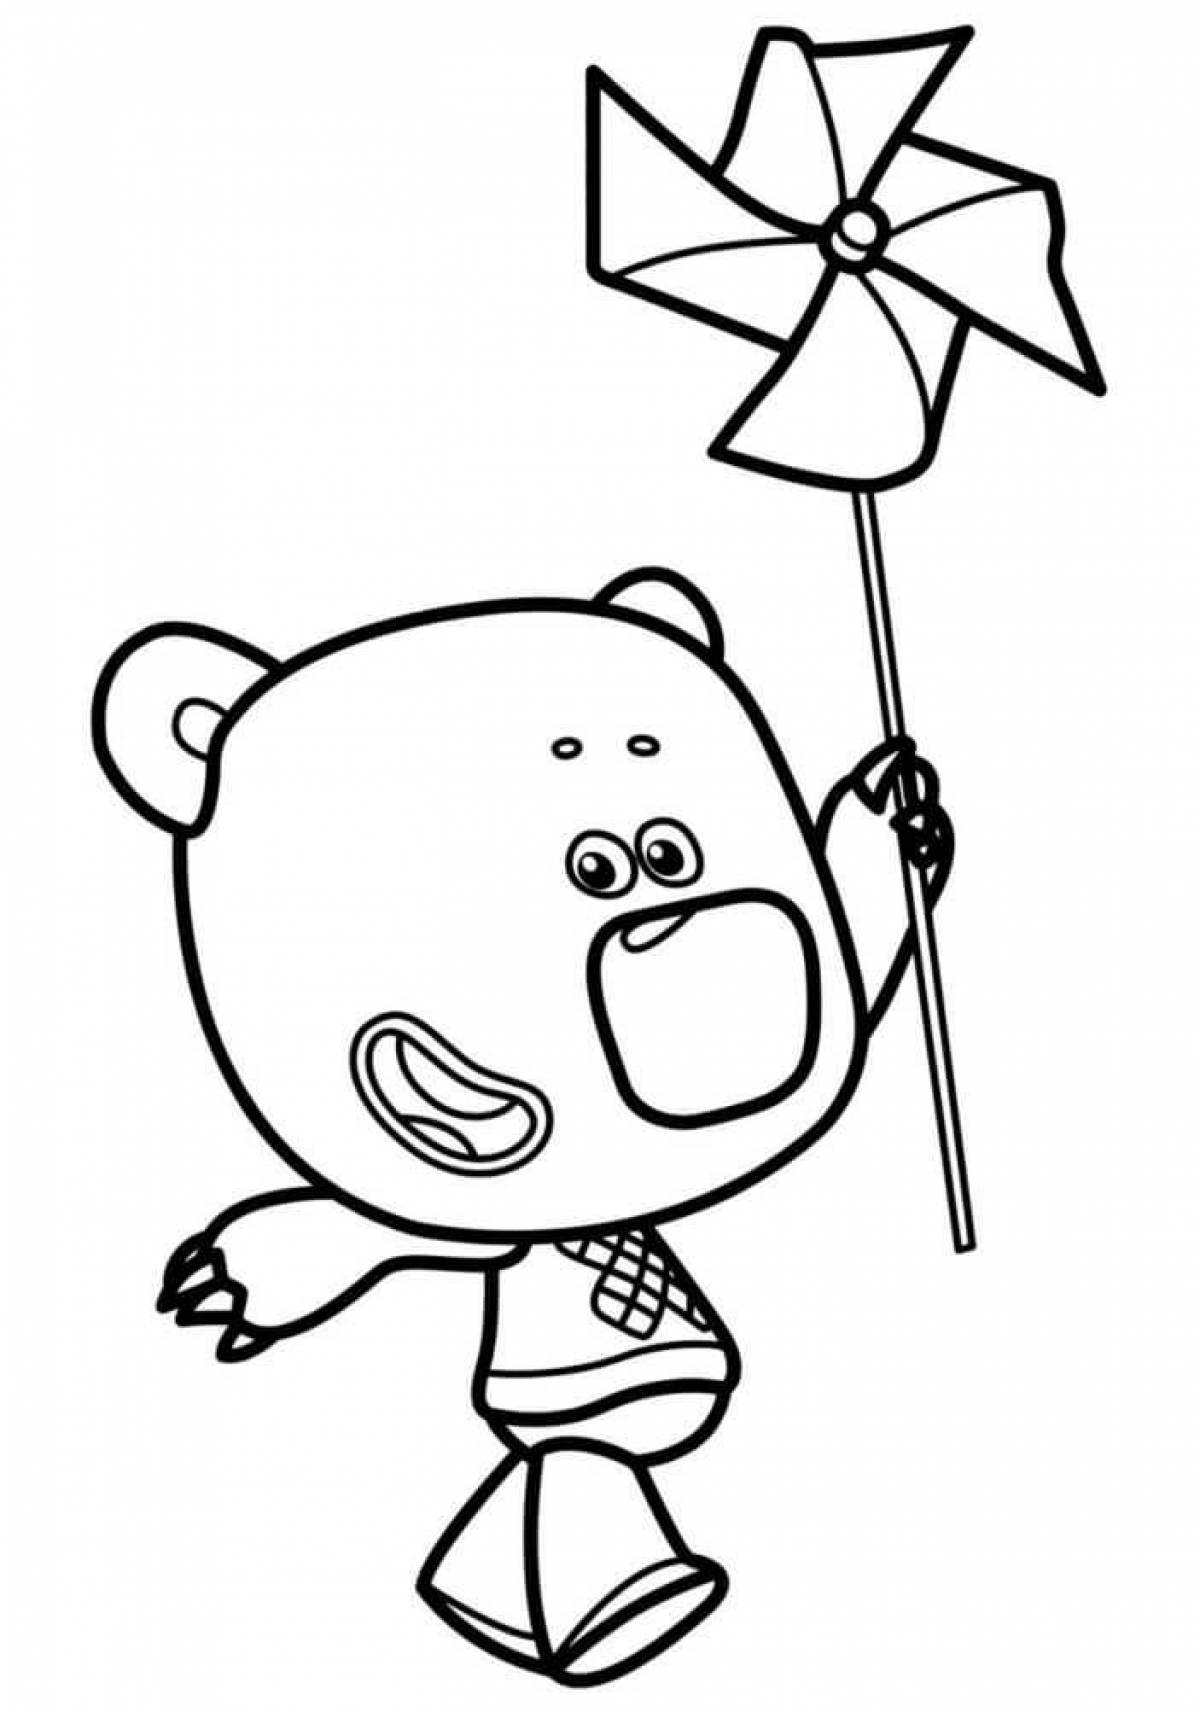 Crazy bear coloring pages for kids